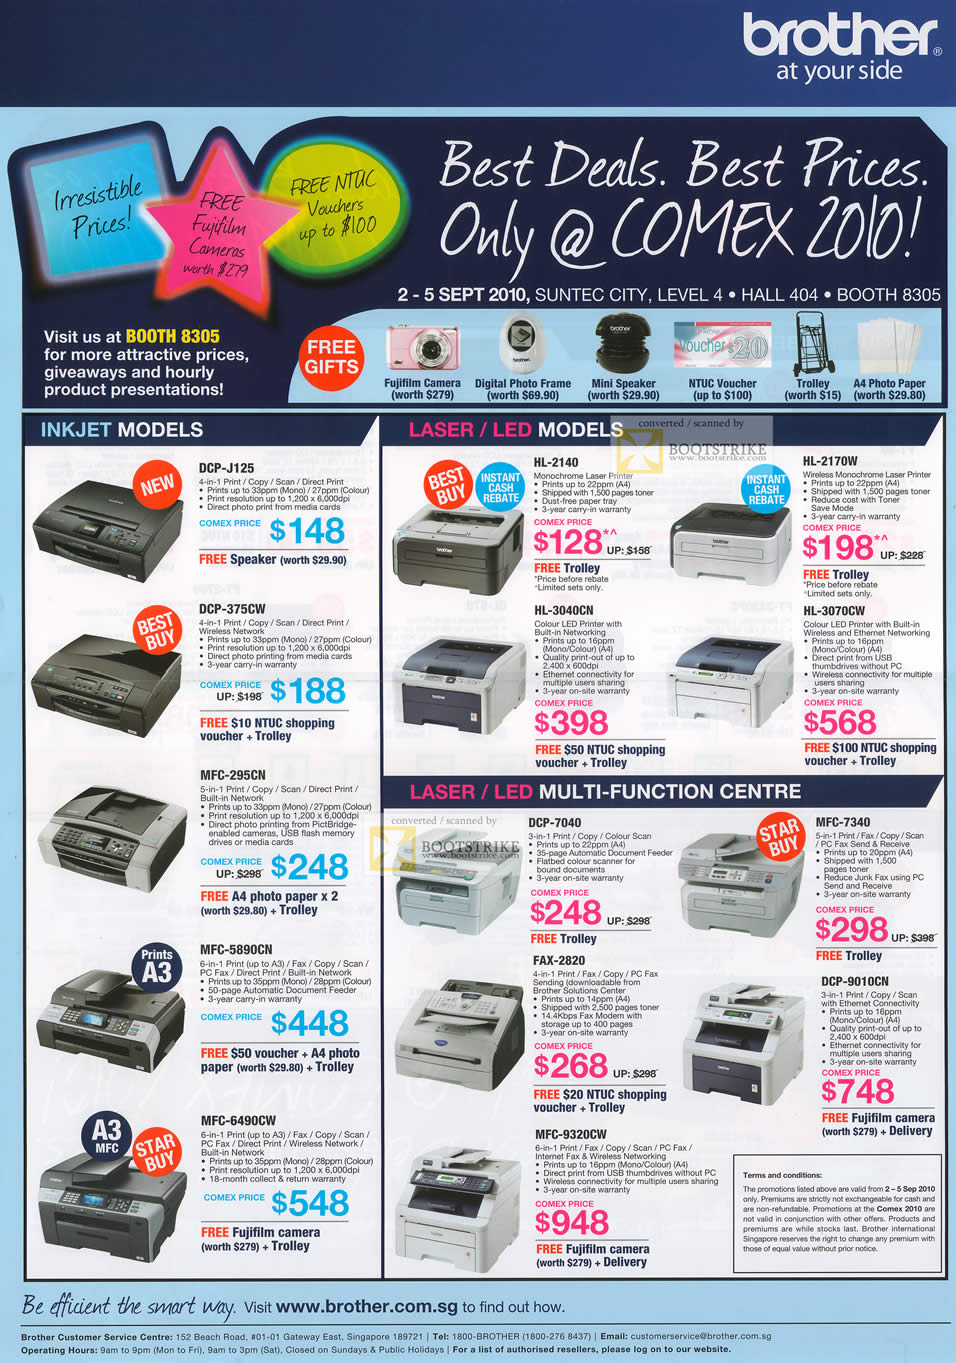 Comex 2010 price list image brochure of Brother Printers Inkjet DCP J125 375CW MFC 295CN 6490CW Laser HL 2140 3070CW Mutli Function 7040 FAX 9010CN